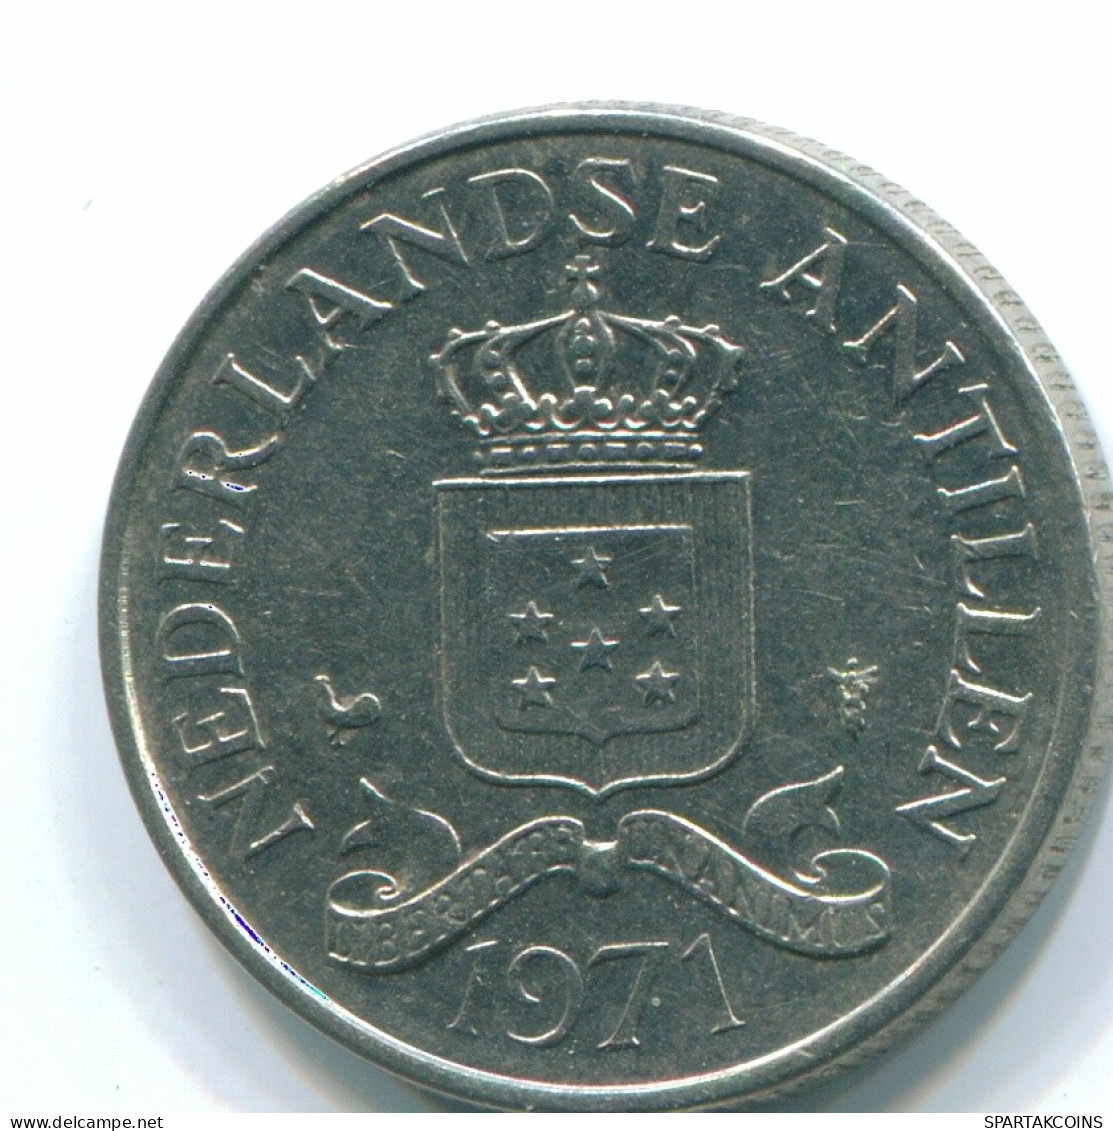 25 CENTS 1971 NETHERLANDS ANTILLES Nickel Colonial Coin #S11580.U.A - Antille Olandesi